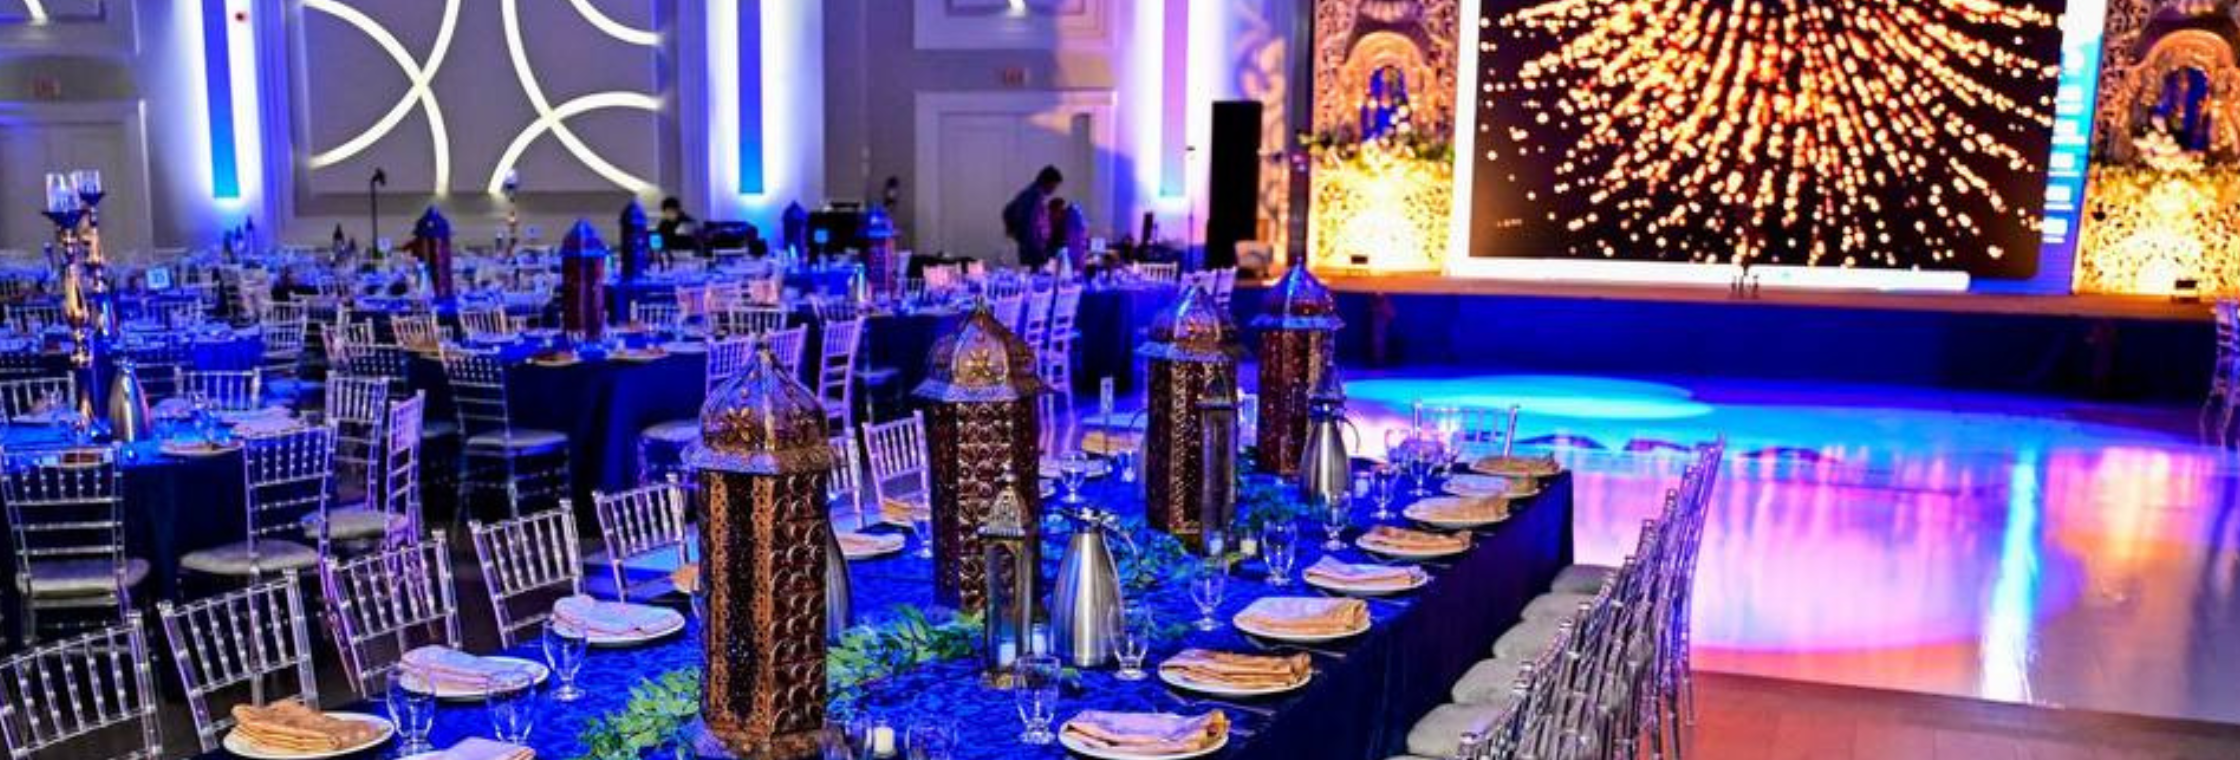 Why Choose Palacio Event Centre for Corporate Events